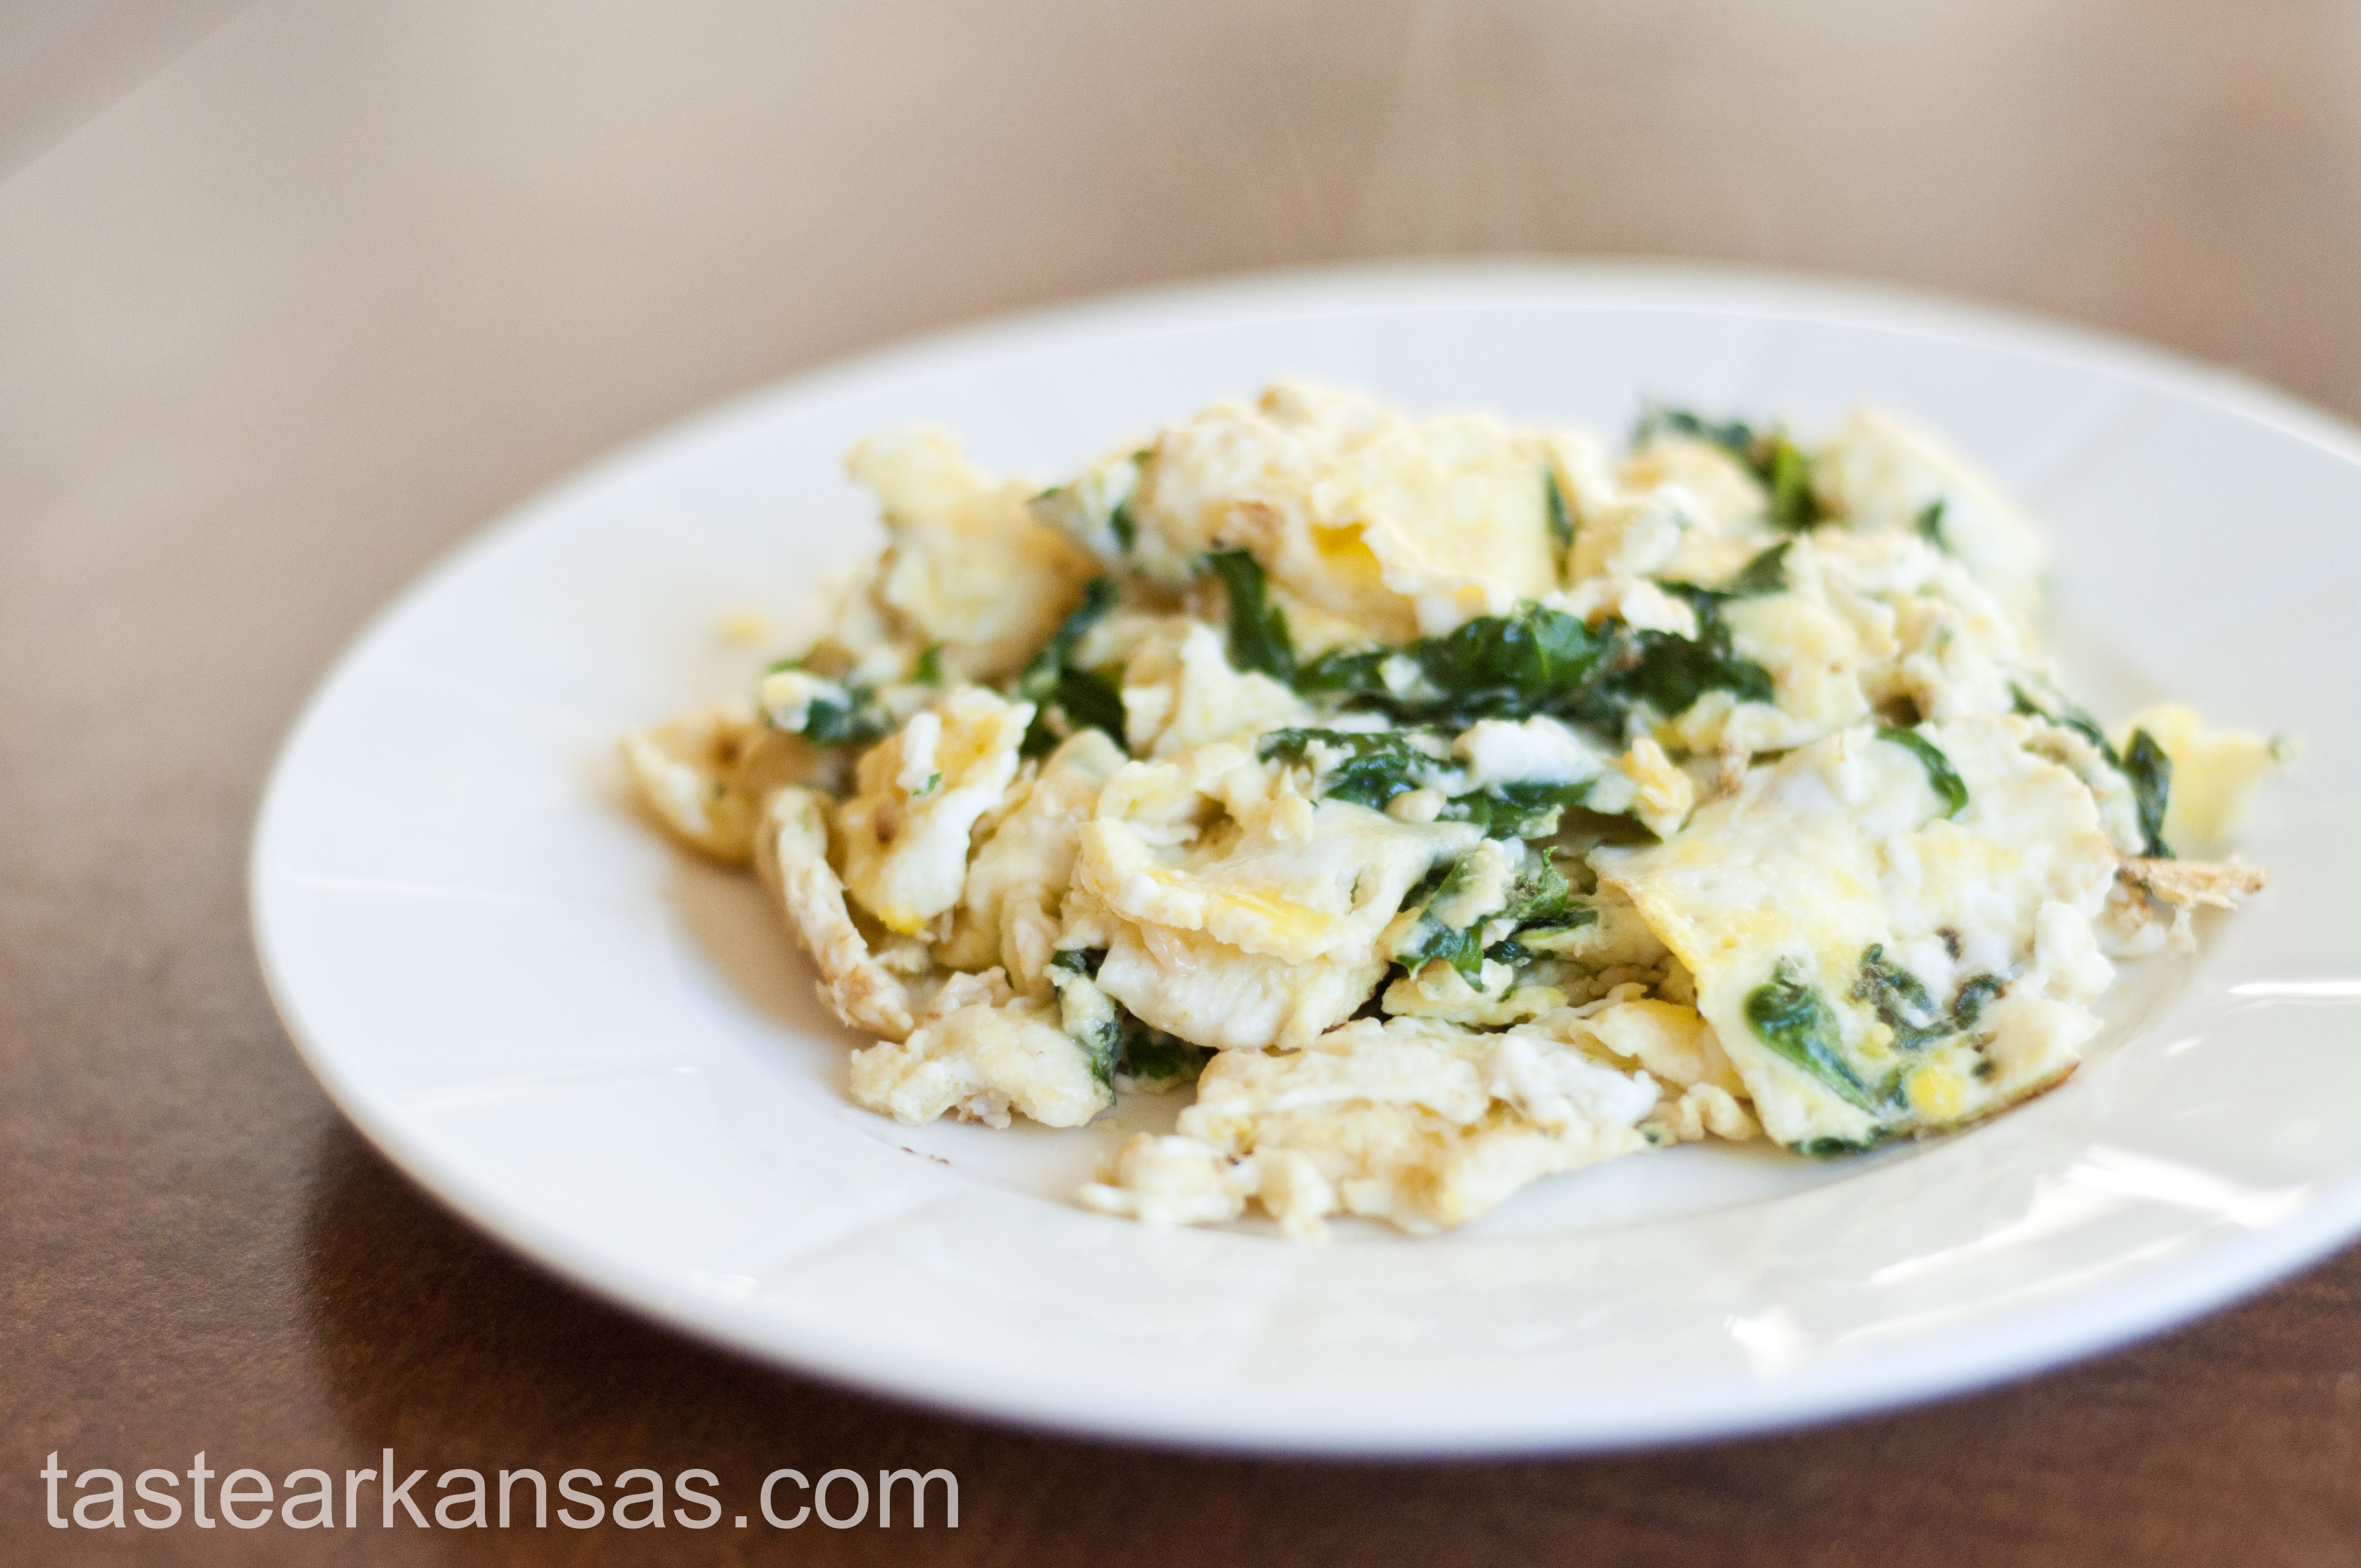 Spinach and Scrambled Eggs